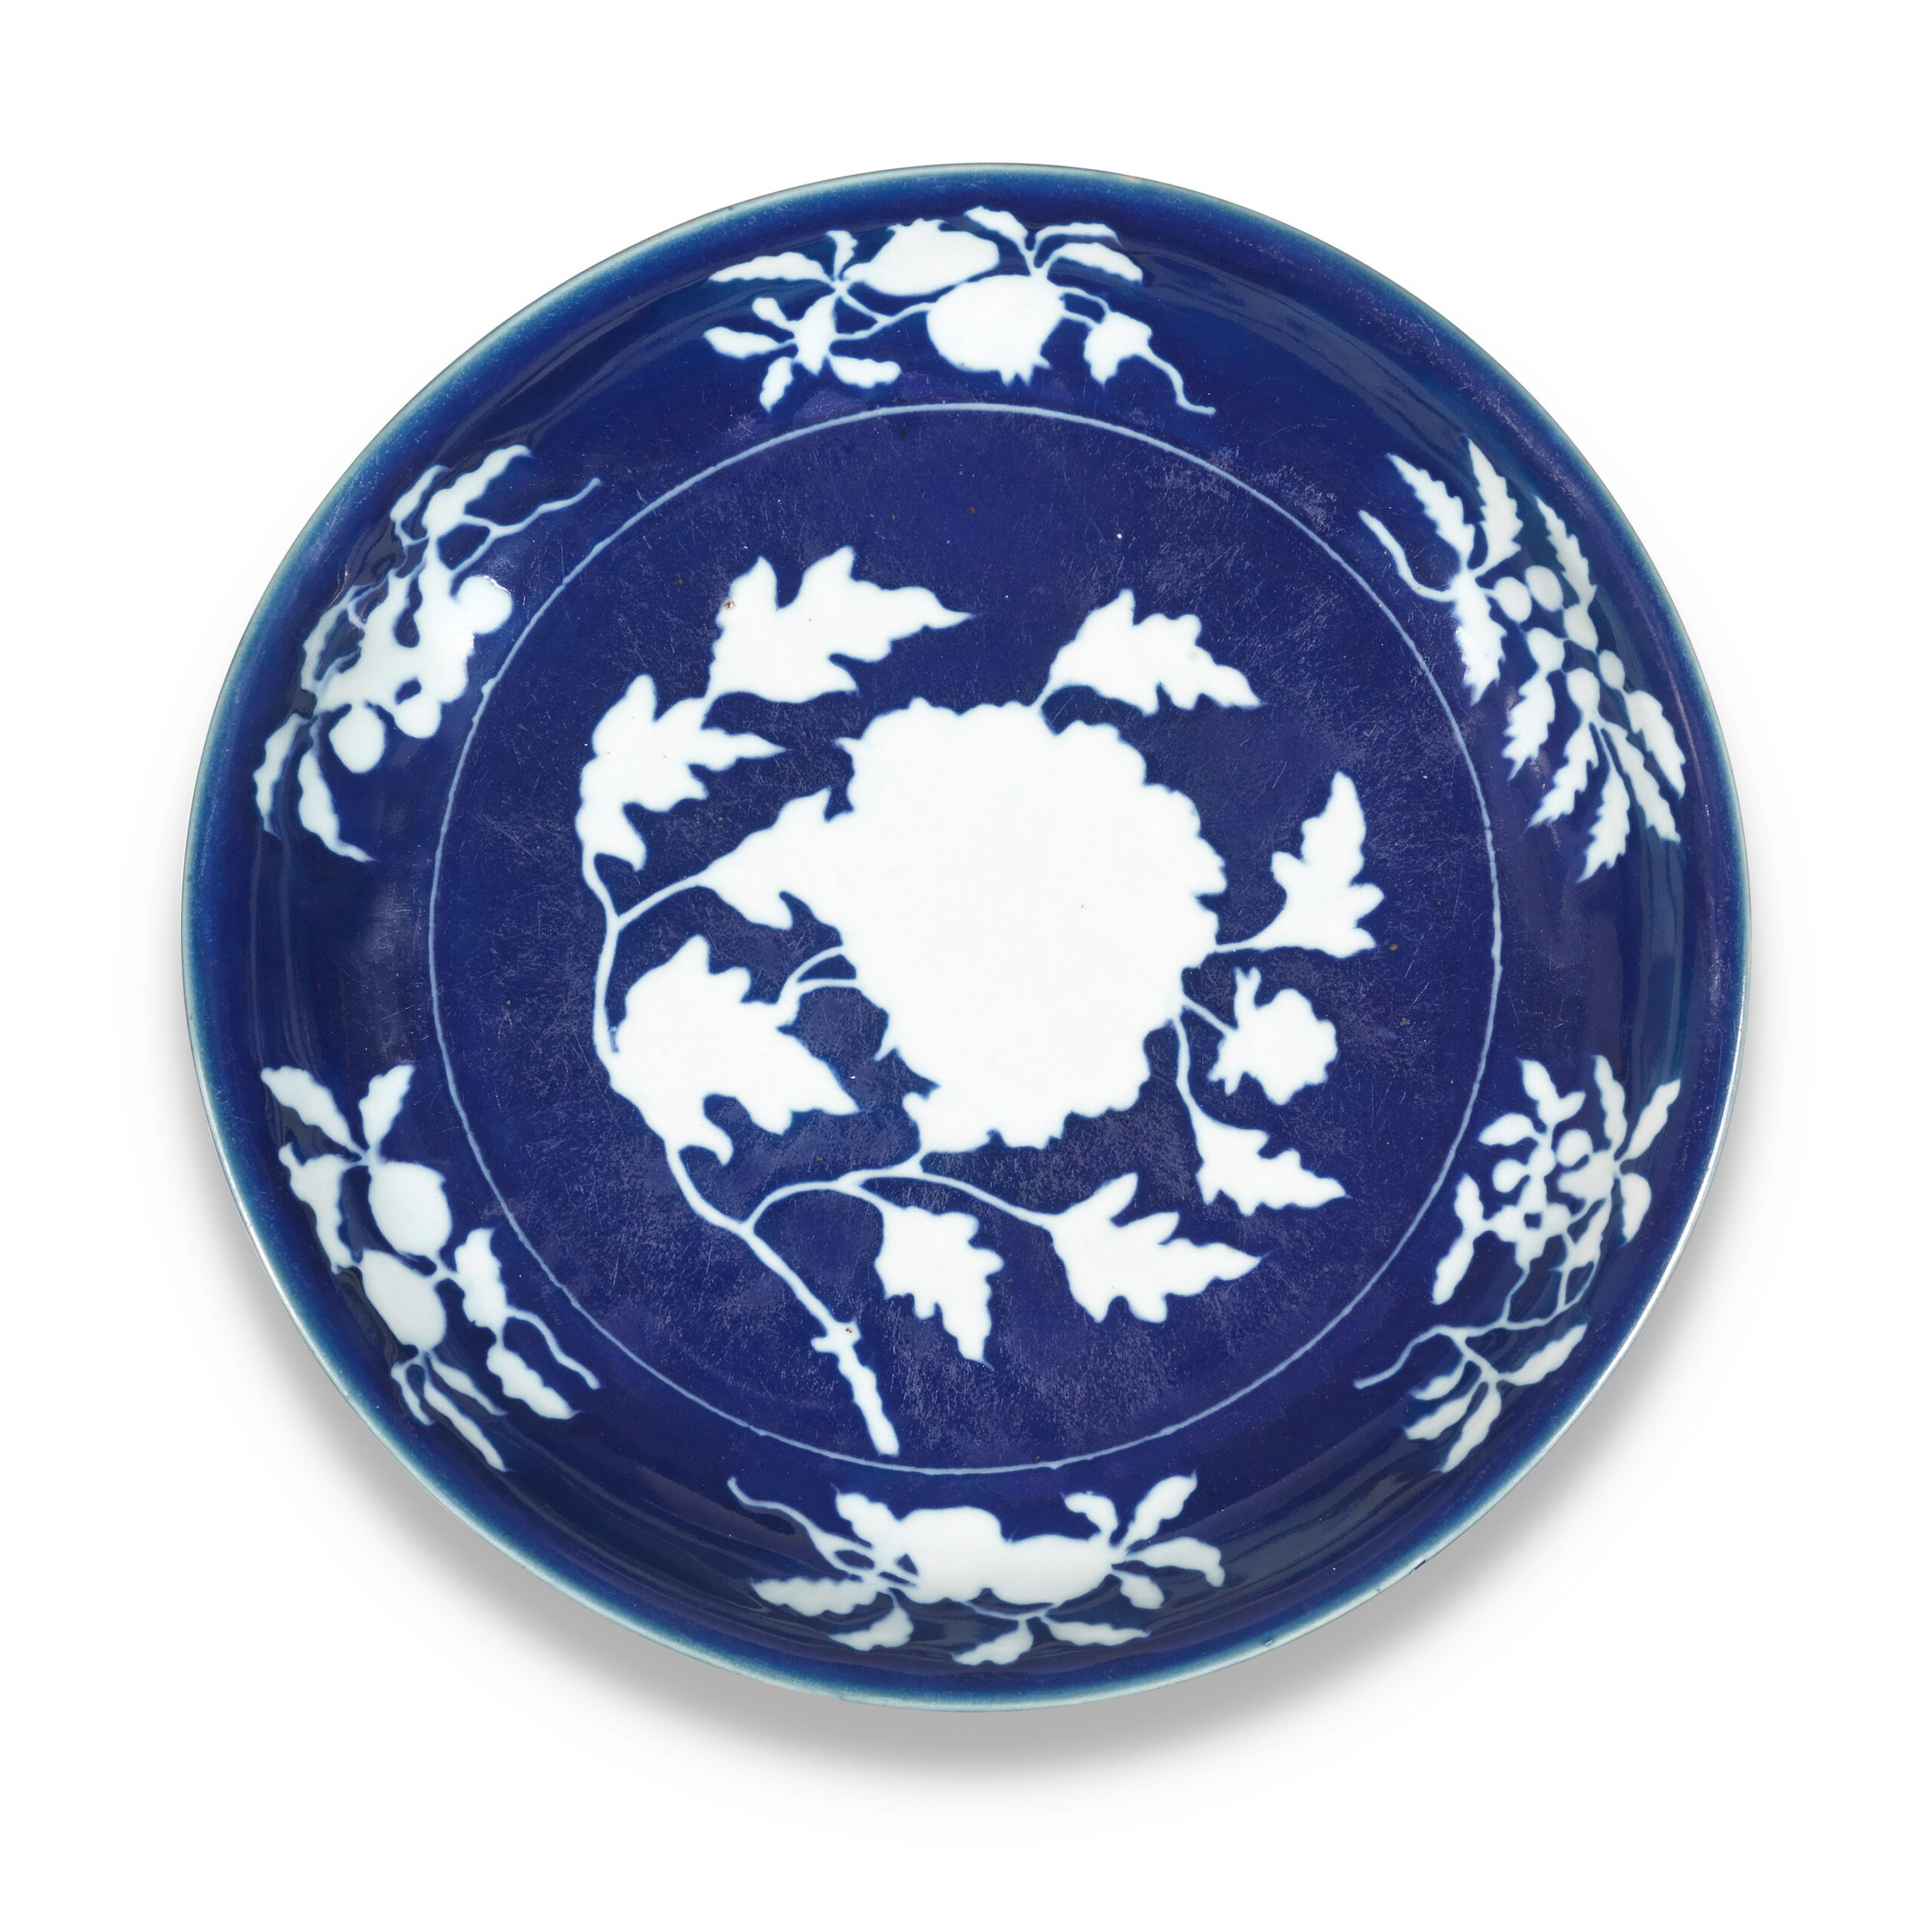 AN EXCEPTIONALLY RARE LARGE BLUE AND WHITE RESERVE-DECORATED ‹PEONY› DISH, Xuande six-character mark in a line and of the period